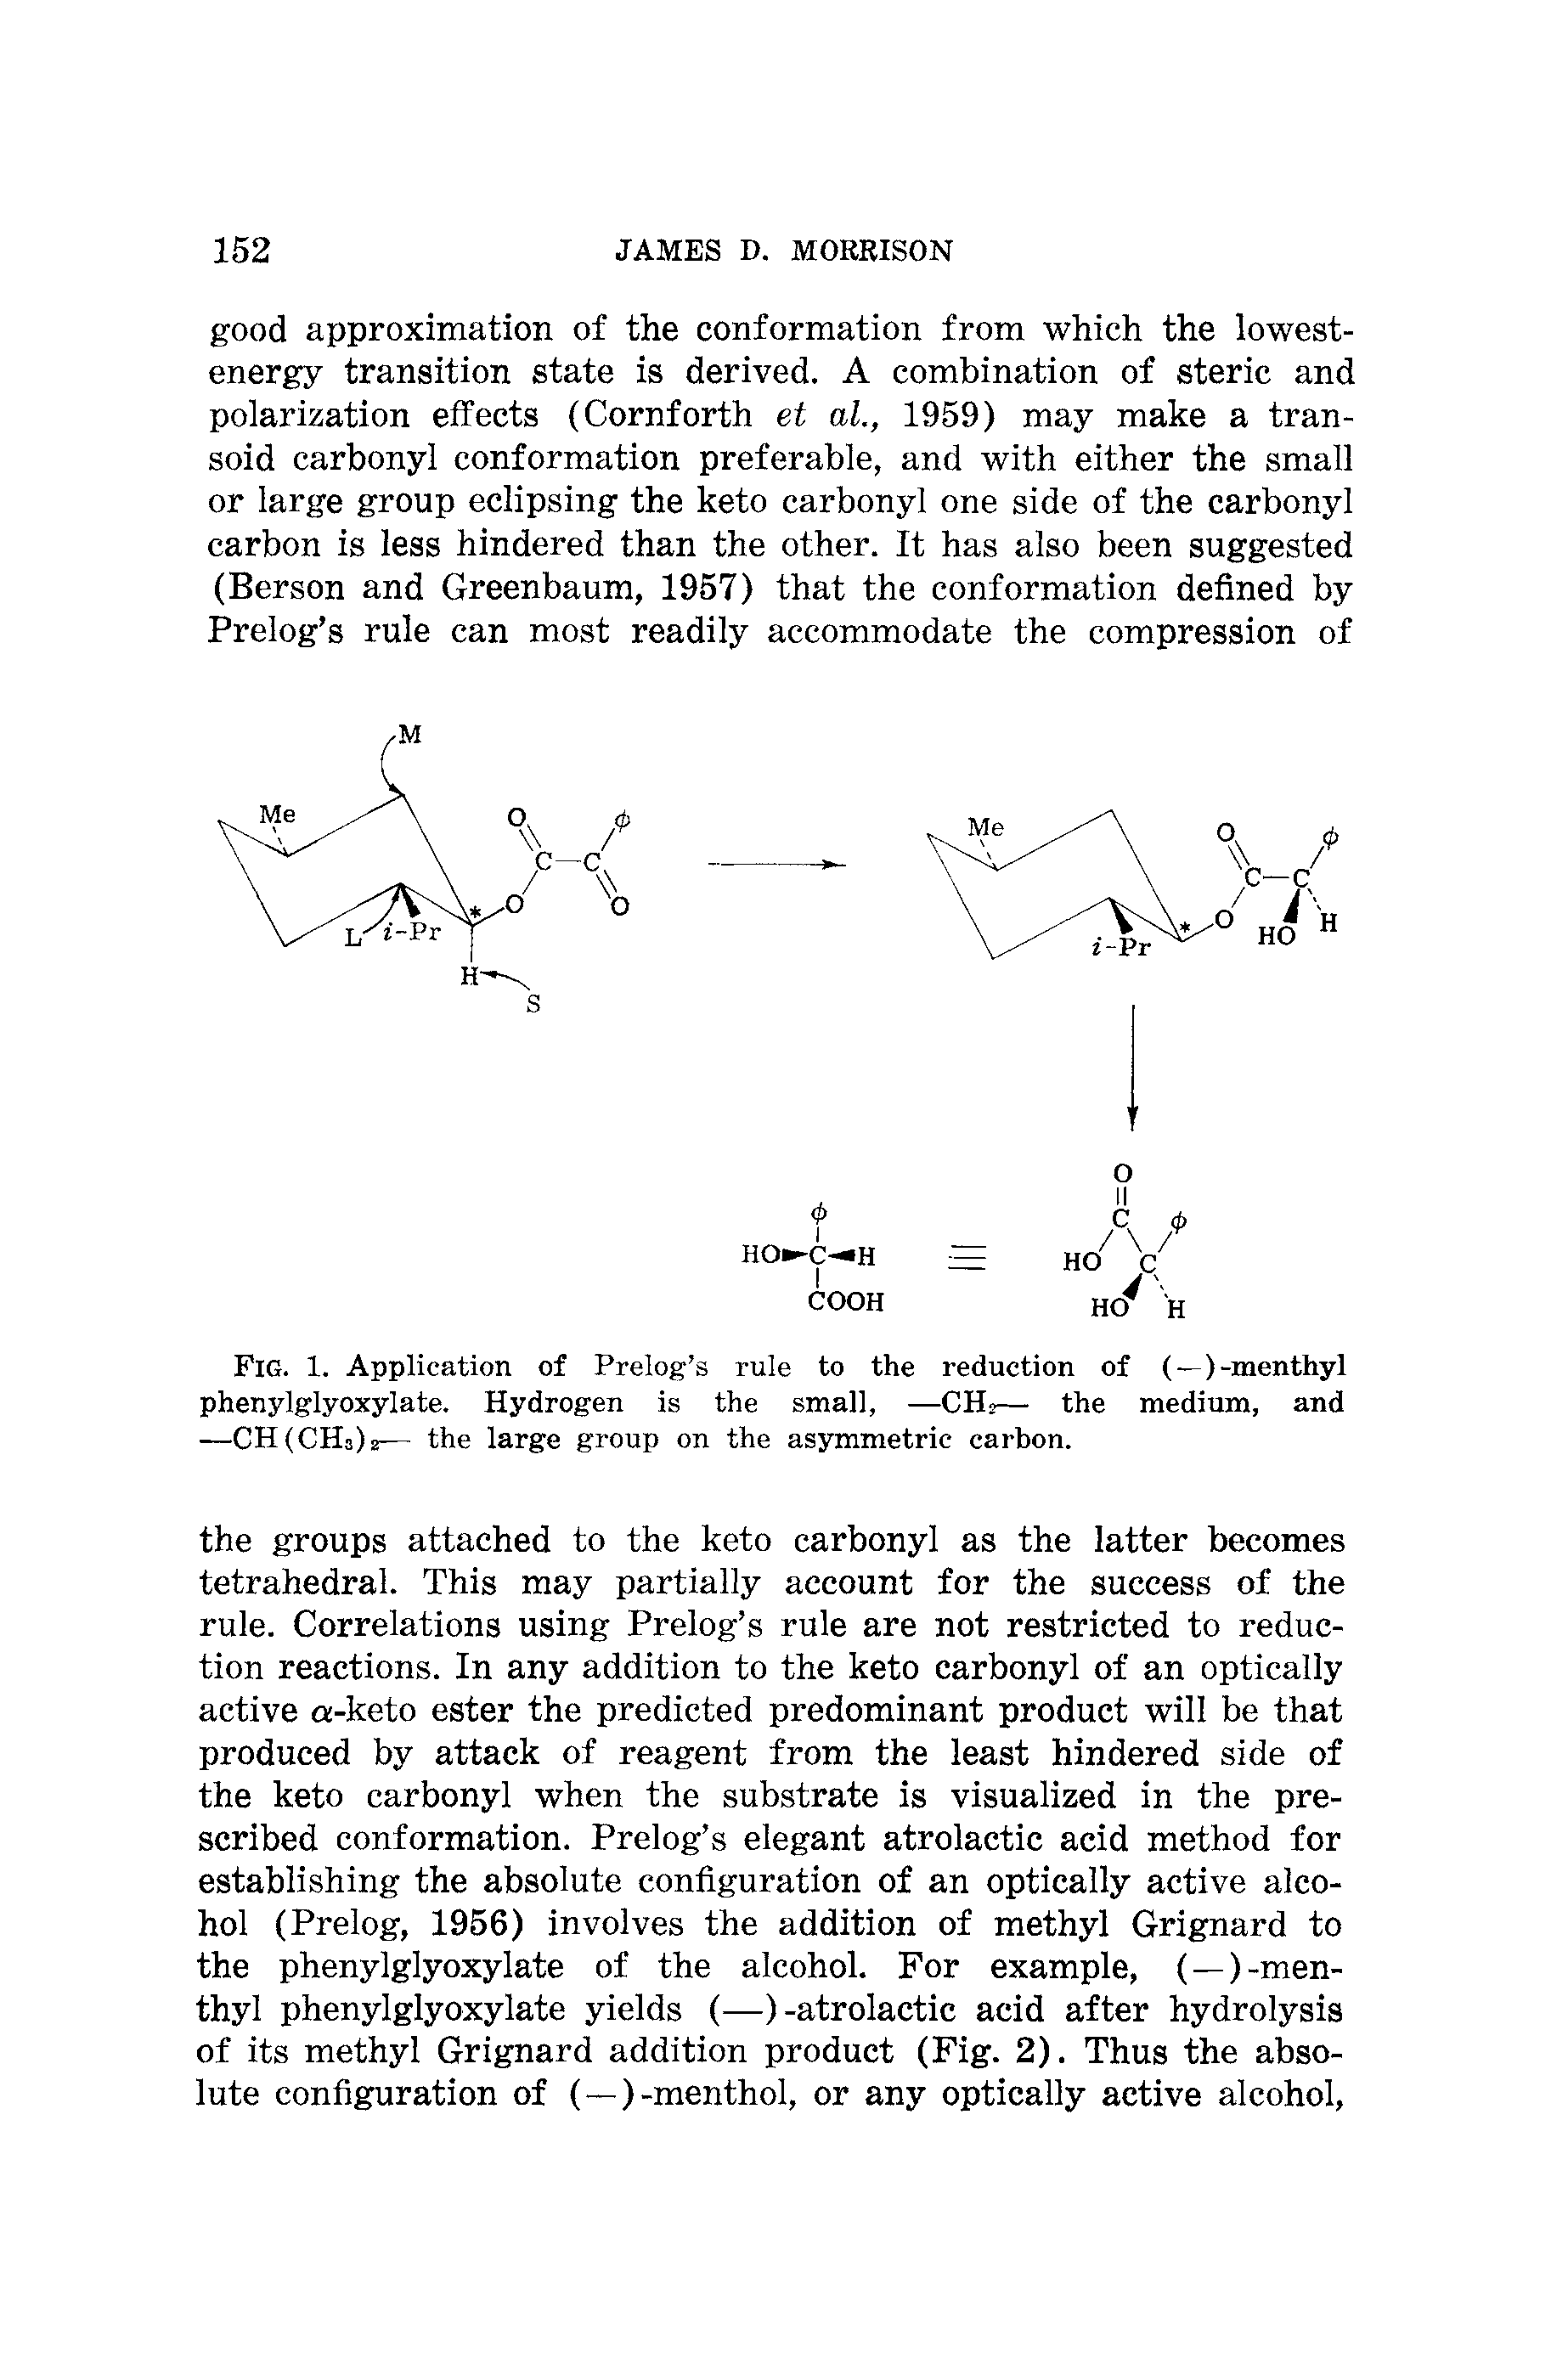 Fig. 1. Application of Prolog s rule to the reduction of (—)-menthyl phenylglyoxylate. Hydrogen is the small, —CHs— the medium, and —CH(CH3)2— the large group on the asymmetric carbon.